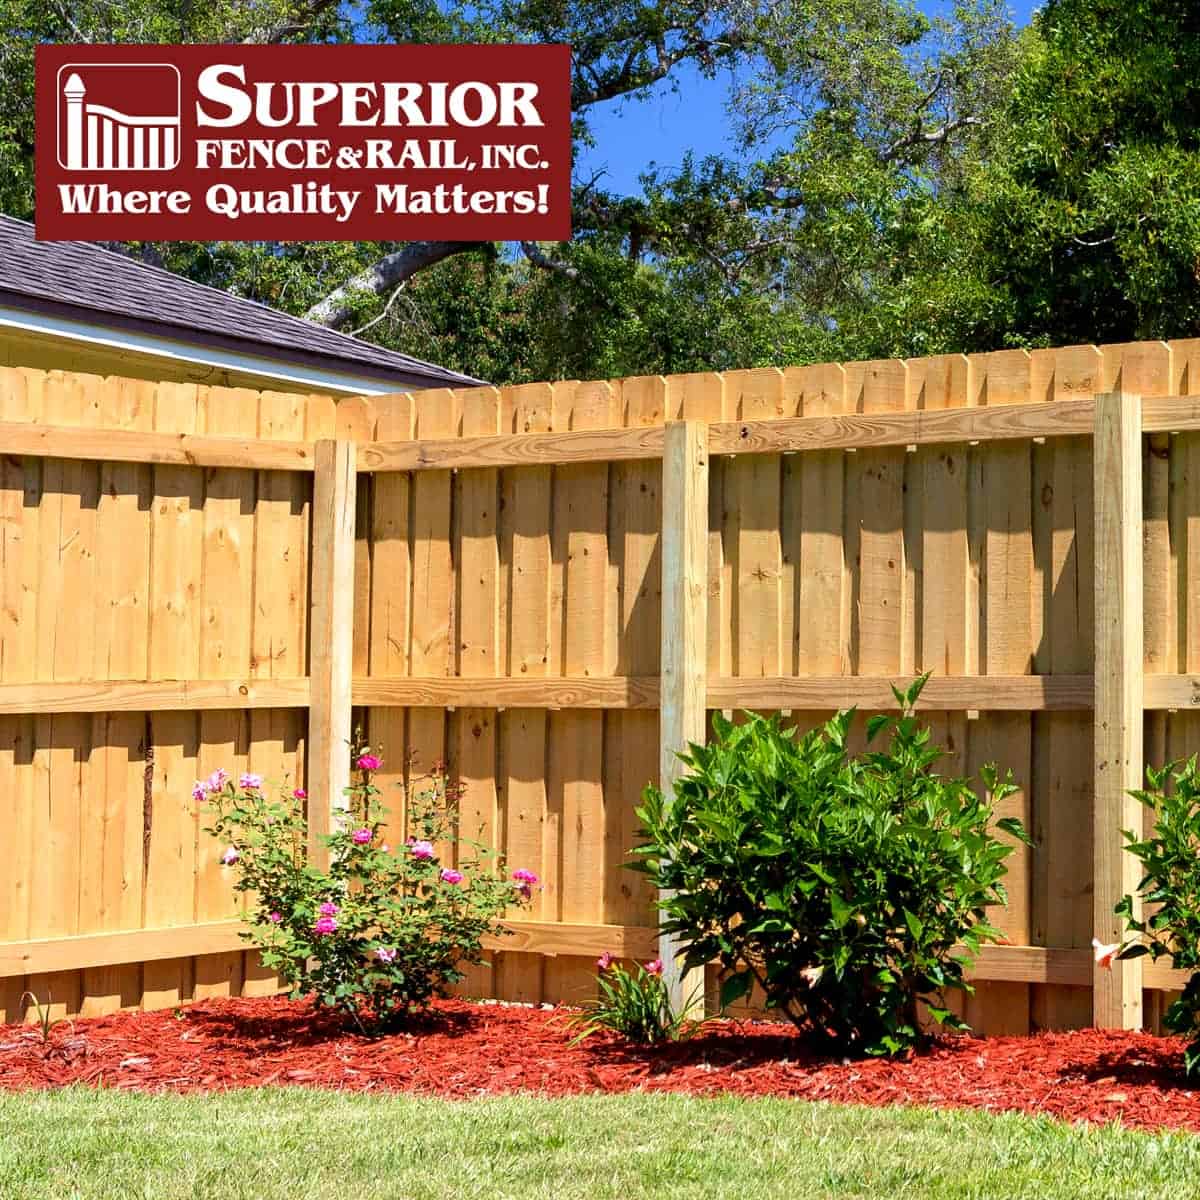 Lowell fence company contractor